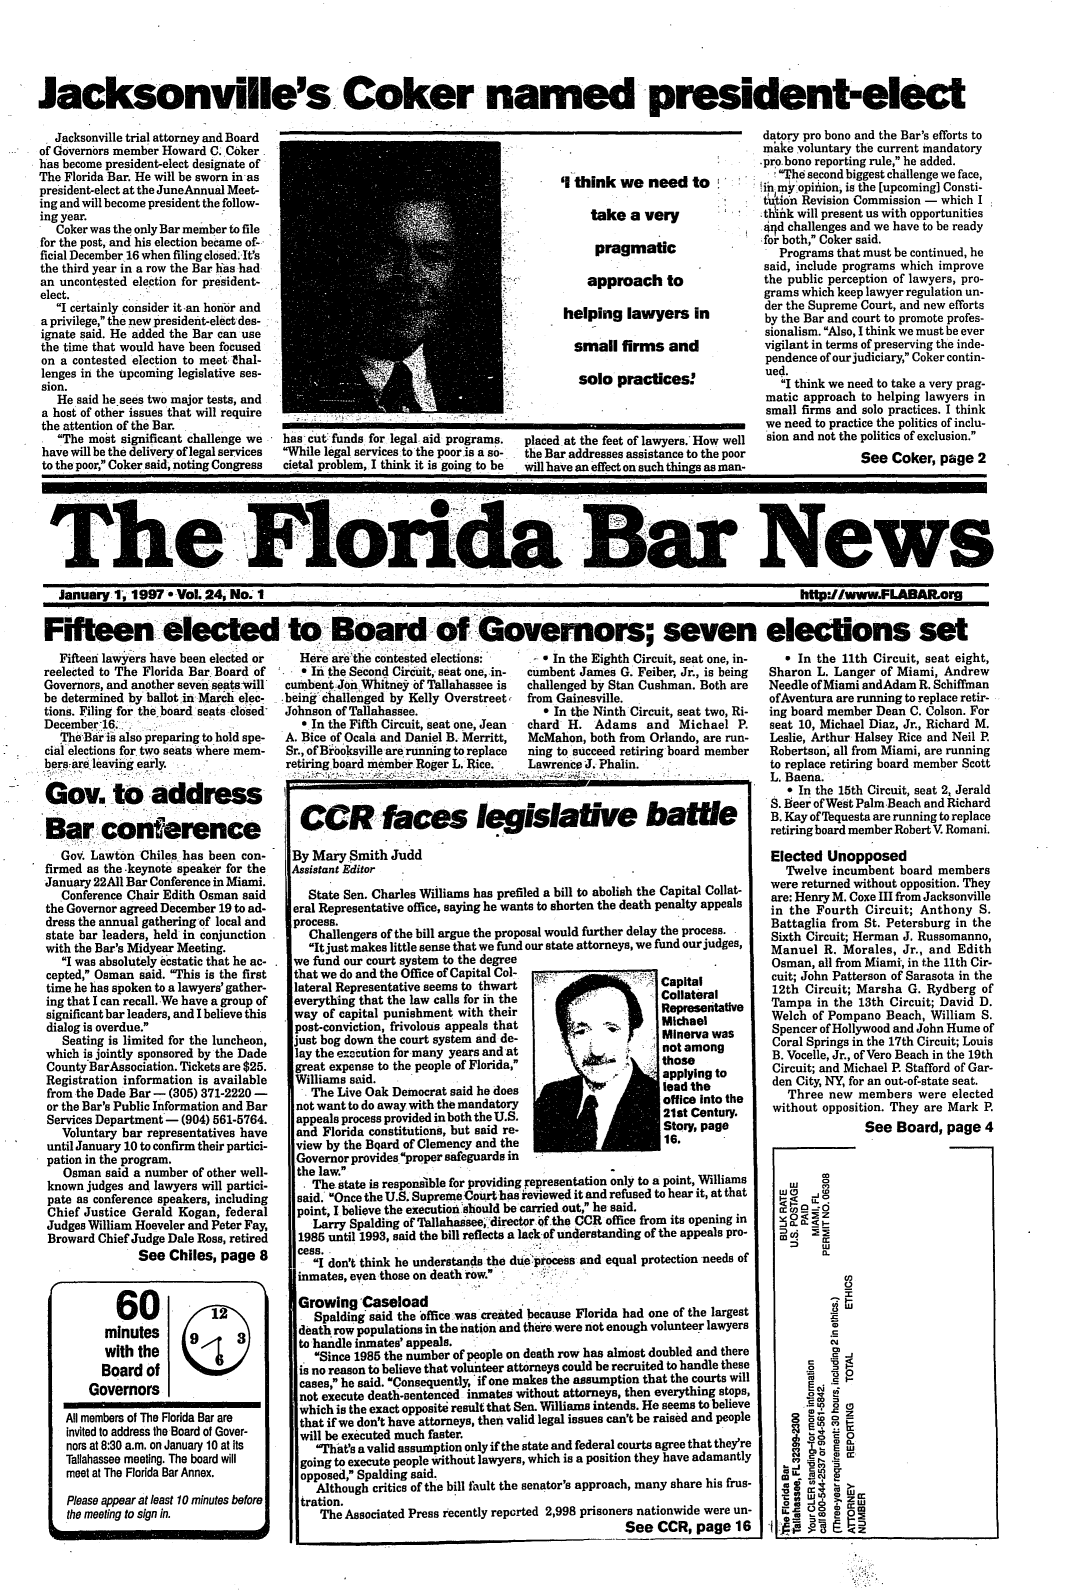 handle is hein.barjournals/flabn0024 and id is 1 raw text is: 





Jacksonville's. Coker named president-elect


  Jacksonville trial attorney and Board
of Governors member Howard C. Coker
has become president-elect designate of
The Florida Bar. He will be sworn inas
president-elect at the JuneAnnual Meet-
ing and will become president the follow-
ing year.
   Coker was the only Bar member to file
for the post, and his election became of-,
ficial December 16 when filing closed.-It's
the third year in a row the Bar has had
an uncontested election for president-
elect.
   I certainly consider it -an honor and
a privilege, the new president-elect des-
ignate said. He added the Bar can use
the time that would have been focused
on a contested election to meet hal-
lenges in the upcoming legislative ses-
sion.
   He said lie sees two major tests, and
a host of other issues that will require
the attention of the Bar.
   The most significant challenge we
have will be the delivery of legal services
to the poor, Coker said, noting Congress


'1 think we need to

     take a very

     pragmatic

     approach to

helping lawyers in

  small firms and

  solo practices!


has cut: funds for legal. aid programs.
While legal services to the poor.is a so-
cietal problem, I think it is going to be


placed at the feet of lawyers. How well
the Bar addresses assistance to the poor
will have an effect on such things as man-


The Flo                                                                                                         News


January 1., 1997.a Vol. 24, No.I


Fifteen elected:
   Fifteen lawyers have been elected or
reelected to The Florida Bar. Board of
Governors, and another seven seats Will
be determined by ballot in March elec-
tions. Filing for the board seats closed
December16..
   TheBr is also preparing to hold spe-
cial elections for two seats where mem-
bersare leavinig early.

Gov. to address

Bar conference
   Gov. Lawton Chiles has been con-
firmed as the .keynote speaker for the
January 22AII Bar Conference in Miami.
   Conference Chair Edith Osman said
the Governor agreed December 19 to ad-
dress the annual gathering of local and
state bar leaders, held in conjunction
with the Bar's Midyear Meeting.
   I was absolutely ecstatic that he ac-
 cepted, Osman said. This is the first
 time he has spoken to a lawyers' gather-
 ing that I can recall. We have a group of
 significant bar leaders, and I believe this
 dialog is overdue.
   Seating is limited for the luncheon,
 which is jointly sponsored by the Dade
 County BarAssociation. Tickets are $25.
 Registration information is available
 from the Dade Bar - (305) 371-2220 -
 or the Bar's Public Information and Bar
 Services Department - (904) 561-5764.
   Voluntary bar representatives have
 until January 10 to confirm their partici-
 pation in the program.
   Osman said a number of other well-
 known judges and lawyers will partici-
 pate as conference speakers, including
 Chief Justice Gerald Kogan, federal
 Judges William Hoeveler and Peter Fay,
 Broward Chief Judge Dale Ross, retired
               See Chiles, page 8


httpDJ/www.FLABAR~org


         06...:0.1-o
 t0 Boardof Governors; seven elections set
 Here are'the contested elections:     - * In the Eighth Circuit, seat one, in- * In the 11th Circuit, seat eig
   e In the Second Circuit,, seat one, in-  cumbent James G. Feiber, Jr., is being  Sharon L. Langer of Miami, Andr
cumbent'Jon Whitney of Tallahassee is challenged by Stan Cushman. Both are  Needle of Miami andAdam R. Schiffn
being'challenged by Kelly Overstreet, from Gainesville.                     ofAventura are running to replace re
Johnson of Tallahassee.                  * In the Ninth Circuit, seat two, Ri-  ing board member Dean C. Colson.
   o In the Fifth Circuit, seat one, Jean  chard H. Adams and Michael P.     seat 10, Michael Diaz, Jr., Richard
A. Bice of Ocala and Daniel B. Merritt,  McMahon, both from Orlando, are run- Leslie, Arthur Halsey Rice and Nei
Sr., of Bibksville are running to replace  ning to succeed retiring board member  Robertson' all from Miami, are runn
retiring-board member. Roger L. Rice. Lawrence J. Phalin.                    to replace retiring board member Sc
                                  :,..'.s        ' ' ..                    T. Haena.


*ht,
rew
man
etir-
For
M.
il P.
ing
cott


   * In the 15th Circuit, seat 2, Jerald
S. seer of West PalmBeach and Richard
B. Kay of'Tquesta are running to replace
retiring board member Robert V. Romani.

Elected Unopposed
  Twelve incumbent board members
were returned without opposition. They
are: Henry M. Coxe III from Jacksonville
in the Fourth Circuit; Anthony S.
Battaglia from St. Petersburg in the
Sixth Circuit; Herman J. Russomanno,
Manuel R. Morales, Jr., and Edith
Osman, all from Miami, in the 11th Cir-
cuit; John Patterson of Sarasota in the
12th Circuit; Marsha G. Rydberg of
Tampa in the 13th Circuit; David D.
Welch of Pompano Beach, William S.
Spencer of Hollywood and John Hume of
Coral Springs in the 17th Circuit; Louis
B. Vocelle, Jr., of Vero Beach in the 19th
Circuit; and Michael P. Stafford of Gar-
den City, NY for an out-of-state seat.
   Three new members were elected
without opposition. They are Mark P.
               See Board, page 4


CCR faces legislative ba..le

By Mary Smith Judd
Assistant Editor

   State Sen. Charles Williams has prefiled a bill to abolish the Capital Collat-
eral Representative office, saying he wants to shorten the death penalty appeals
process.
   Challengers of the bill argue the proposal would further delay the process.
   Itjust makes little sense that we fund our state attorneys, we fund our judges,
we fund our court system to the degree
that we do and the Office of Capital Col-.Capial
lateral Representative seems to thwart                    Cpt
everything that the law calls for in the  *.,             Collateral
way of capital punishment with their                      Representative
post-conviction, frivolous appeals that. _                Michael
just bog down the court system and de-                     Minerva was
lay the execution for many years and at        -           not among
great expense to the people of Florida,                   those
Williams ad.                                              applying to
   The Live Oak Democrat said he does                     lad the
 not want to do away with the mandatory                   office into the
 appeals process provided in both the U.S.                 21st Century.
 and Florida constitutions, but said re-                   Story, page
 view by the BQard of Clemency and the                     16.
 Governor provides4proper safeguards in
 the law.
   The state is responsfible for providing representation only to a point, Williams
 said. Once the U.S. Supreme Court has reviewed it and refused to hear it, at that
 point, I believe the execution .should be carried out, he said.
   Larry Spalding of Tallahaiseedirector 4f.the CCR office from its opening in
 1985 until 1993, said the bill reflects a lackof understanding of the appeals pro-
 cess.
   I don't think he understands the duie process and equal protection needs of
 inmates, even those on death row.

 Growing Caseload
 . Spalding said the office was created because Florida had one of the largest
 death row populations in the nation and there were not enough volunteer lawyers
 to handle inmates' appeals.
    Since 1985 the number of people on death row has almost doubled and there
 is no reason to believe that volunteer attorneys could be recruited to handle these
 cases,  he said. Consequently, if one makes the assumption that the courts will
 not execute death-sentenced inmates without attorneys, then everything stops,
 which is the exact opposite result that Sen. Williams intends. He seems to believe
 that if we don't have attorneys, then valid legal issues can't be raised and people
 will be executed much faster.
    That's a valid assumption only if the state and federal courts agree that they're
 going to execute people without lawyers, which is a position they have adamantly
 opposed, Spalding said.
    Although critics of the bill fault the senator's approach, many share his frus-
 tration.
    The Associated Press recently reported 2,998 prisoners nationwide were un-
                                                     See CCR, page 16


        60.r2
      minutes     L9-3
      with the      i    ; IJ
      Board of
    Governors

All members of The Florida Bar are
invited to address the Board of Gover-
nors at 8:30 a.m. on January 10 at Its
Tallahassee meeting. The board will
meet at The Florida Bar Annex.

Please appear at least 10 minutes before
the meeting to sign in.


datory pro bono and the Bar's efforts to
make *voluntary the current mandatory
-pro. bono reporting rule, he added.
   The second biggest challenge we face,
in my opinion, is the [upcoming] Consti-
t ~tin Revision Commission - which I
.th~hk will present us with opportunities
49d challenges and we have to be ready
for both, Coker said.
   Programs that must be continued, he
 said, include programs which improve
 the public perception of lawyers, pro-
 grams which keep lawyer regulation un-
 der the Supreme Court, and new efforts
 by the Bar and court to promote profes-
 sionalism. Also, I think we must be ever
 vigilant in terms of preserving the inde-
 pendence of our judiciary, Coker contin-
 ued.
   I think we need to take a very prag-
 matic approach to helping lawyers in
 small firms and solo practices. I think
 we need to practice the politics of inclu-
 sion and not the politics of exclusion.

                See Coker, page 2


